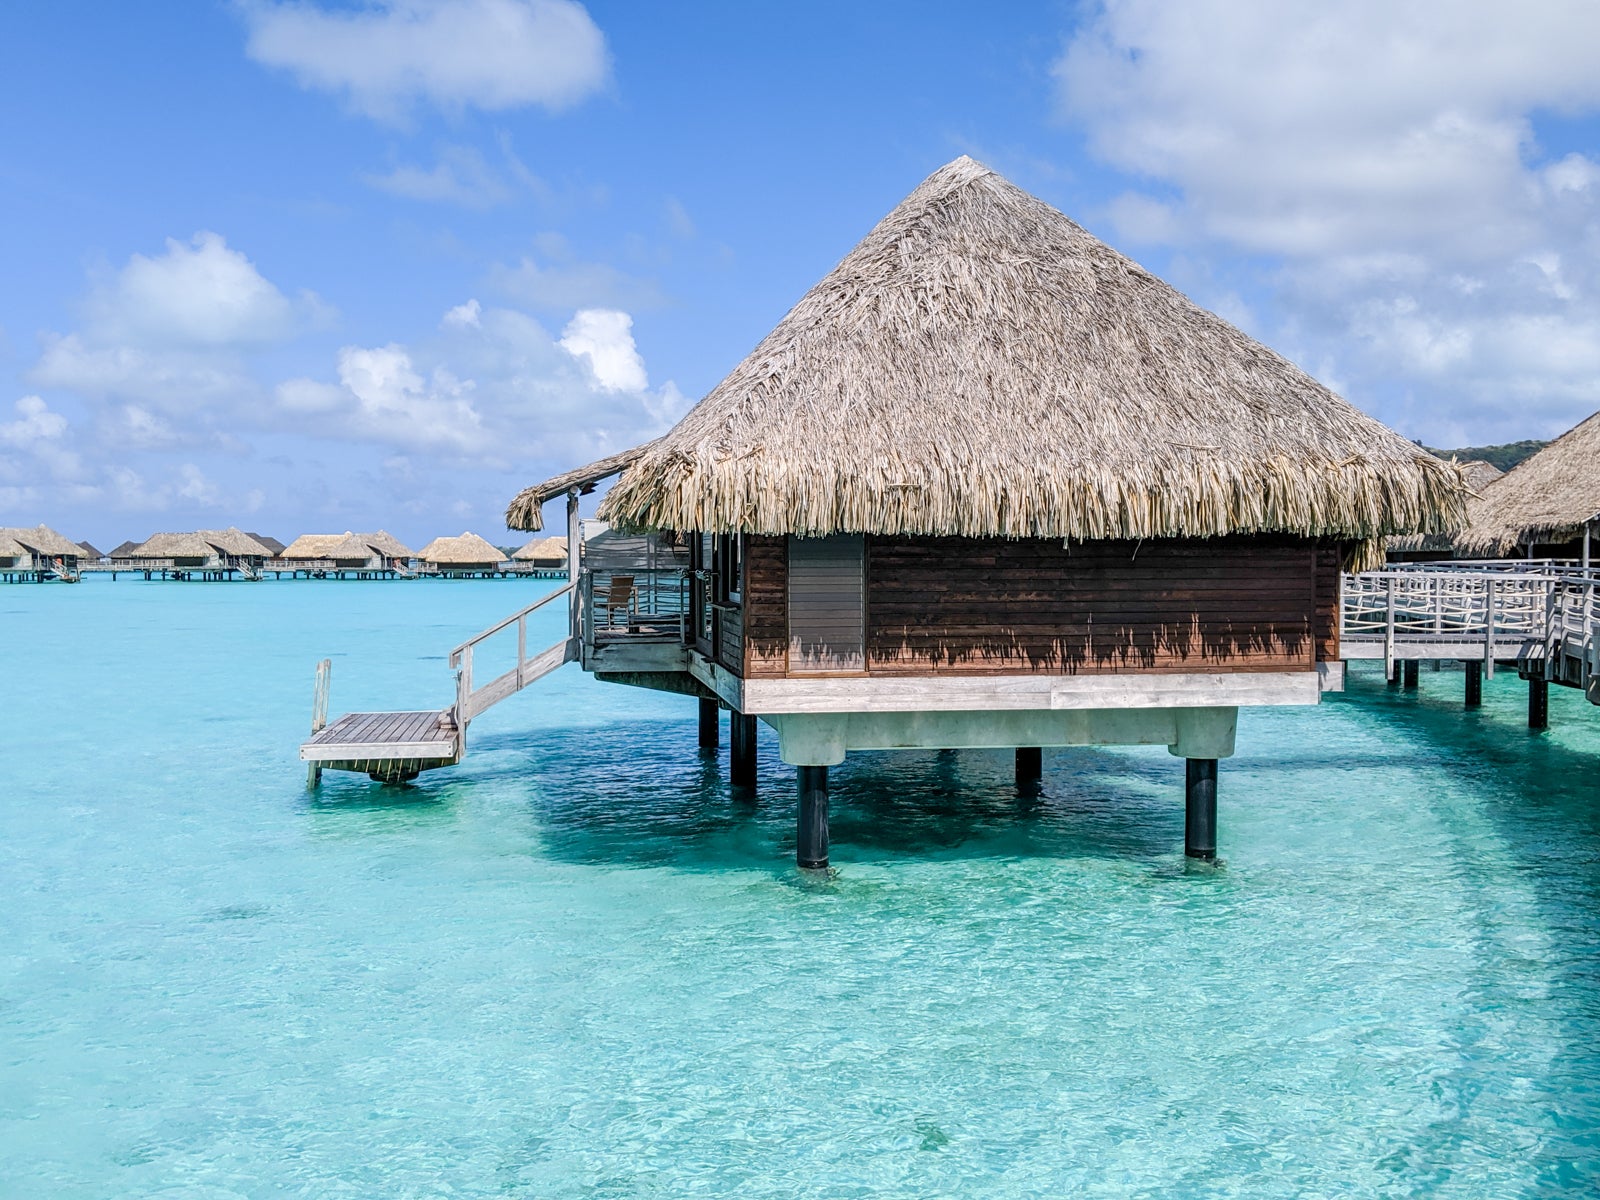 How you can book an overwater bungalow with hotel points - The Points Guy